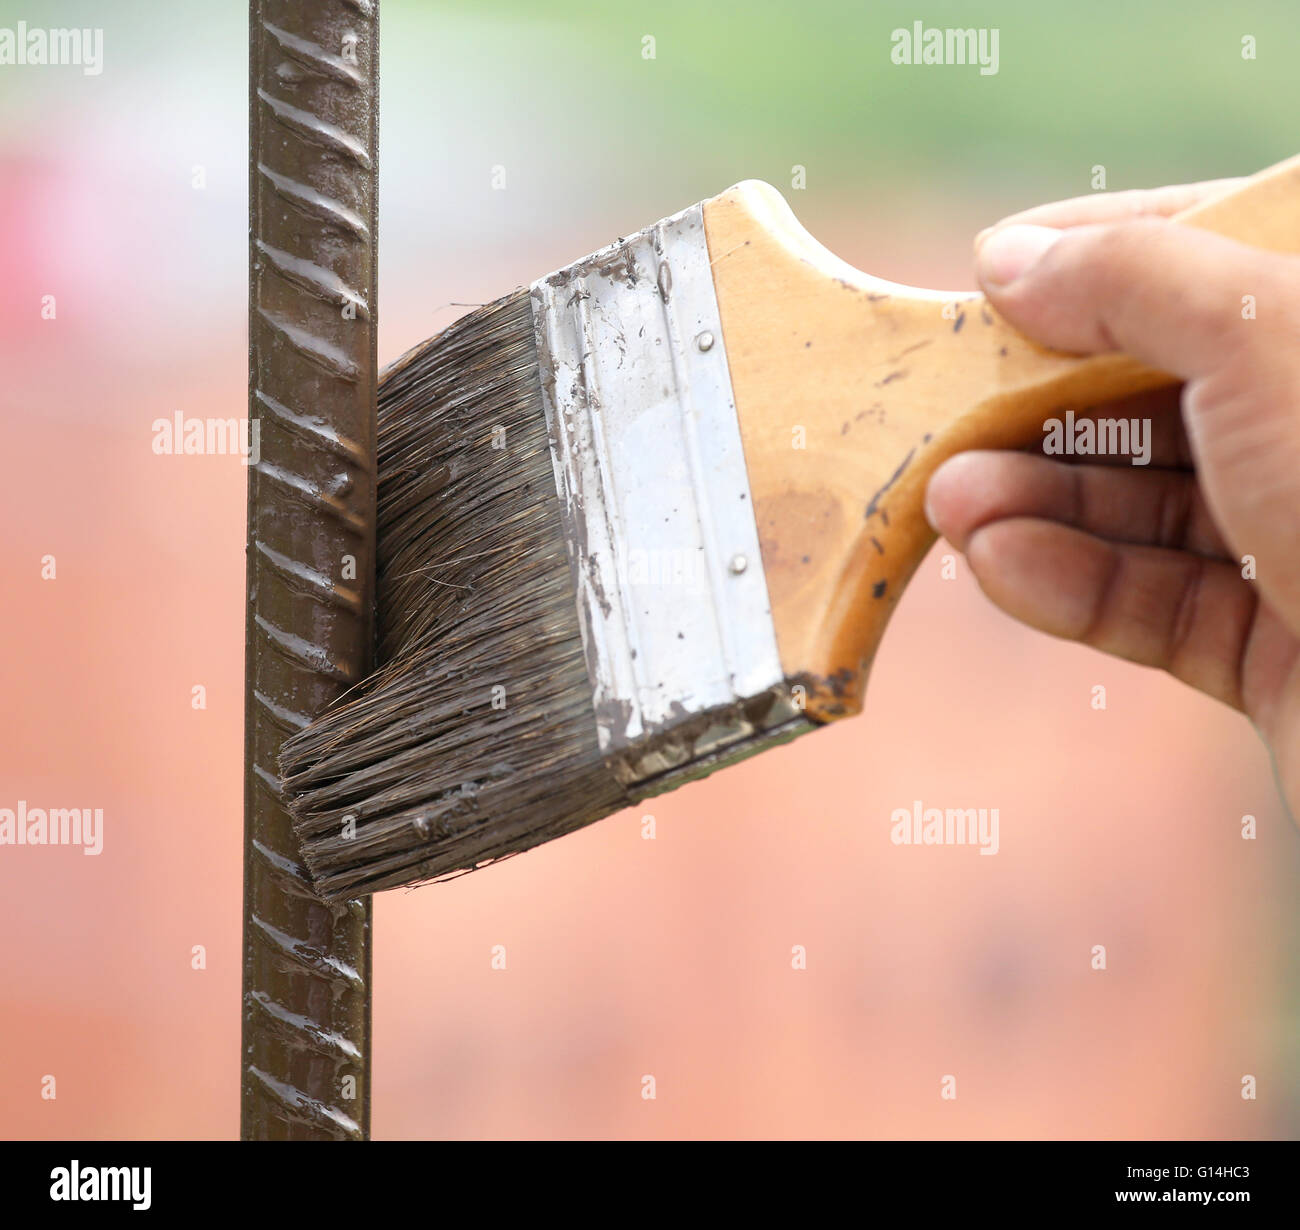 Painting an iron rod outdoor with a brush Stock Photo